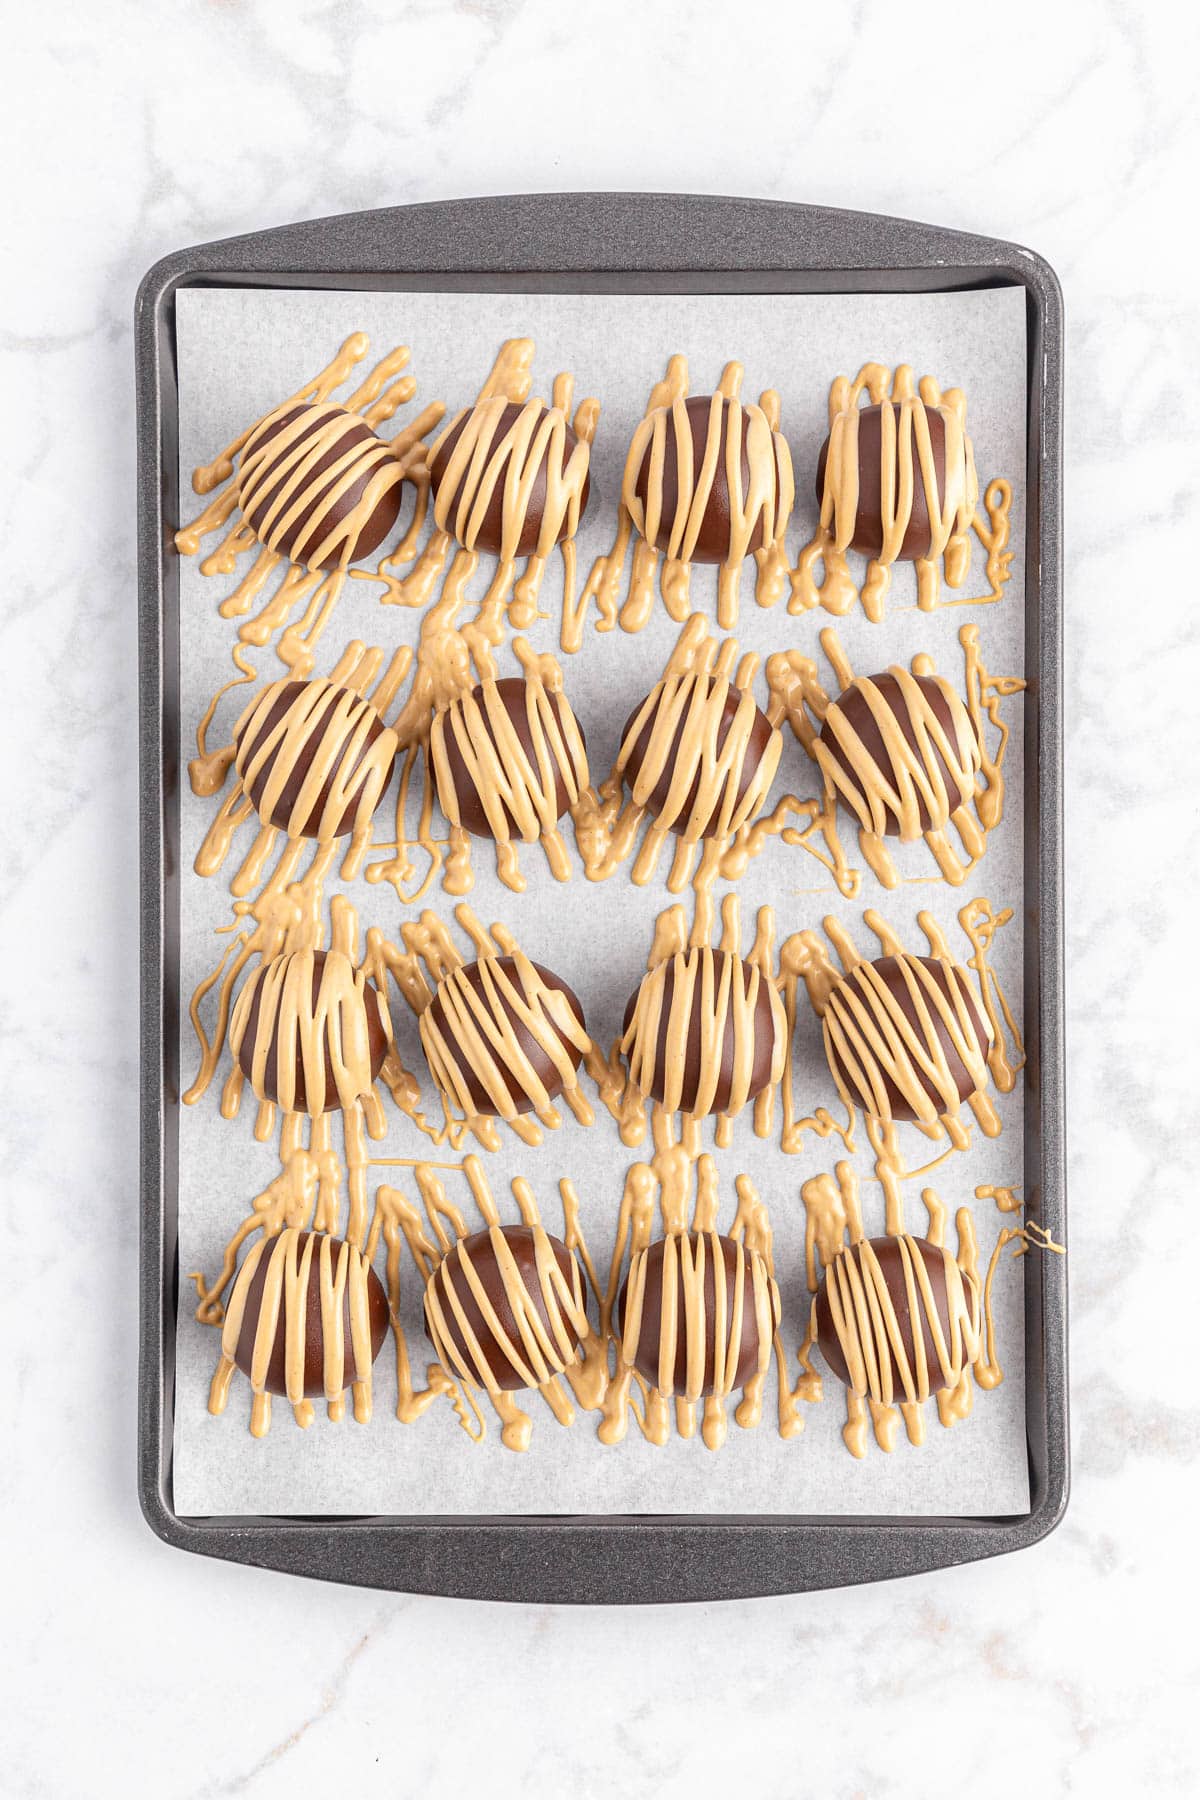 Chocolate peanut butter balls drizzled with peanut butter mixture